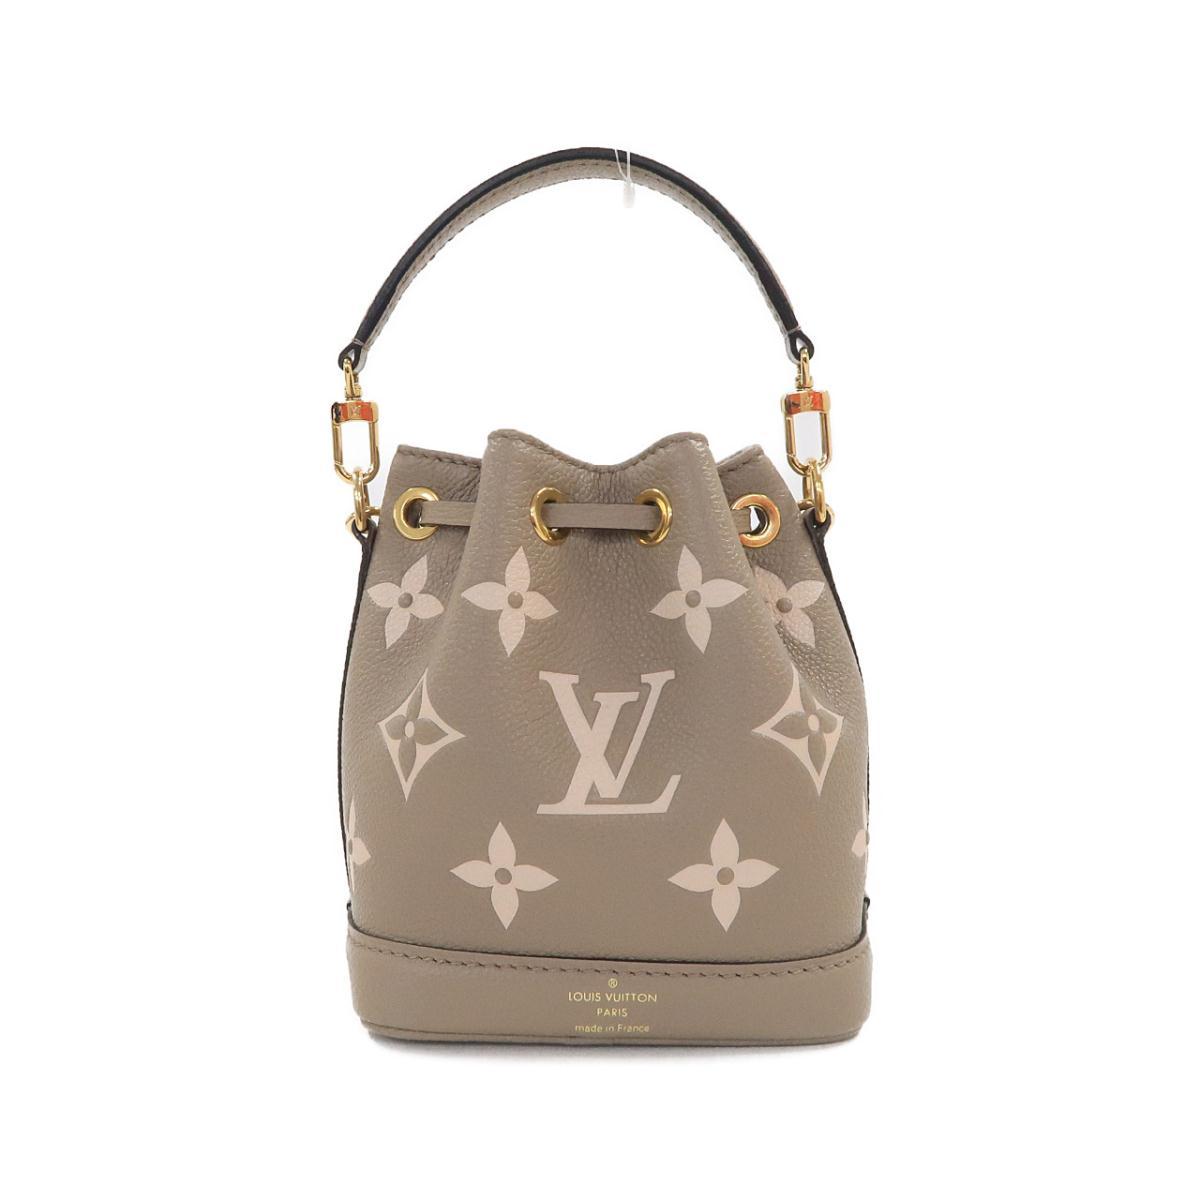 What are your thoughts about different shades of the same canvas? Does it  bother you? : r/Louisvuitton